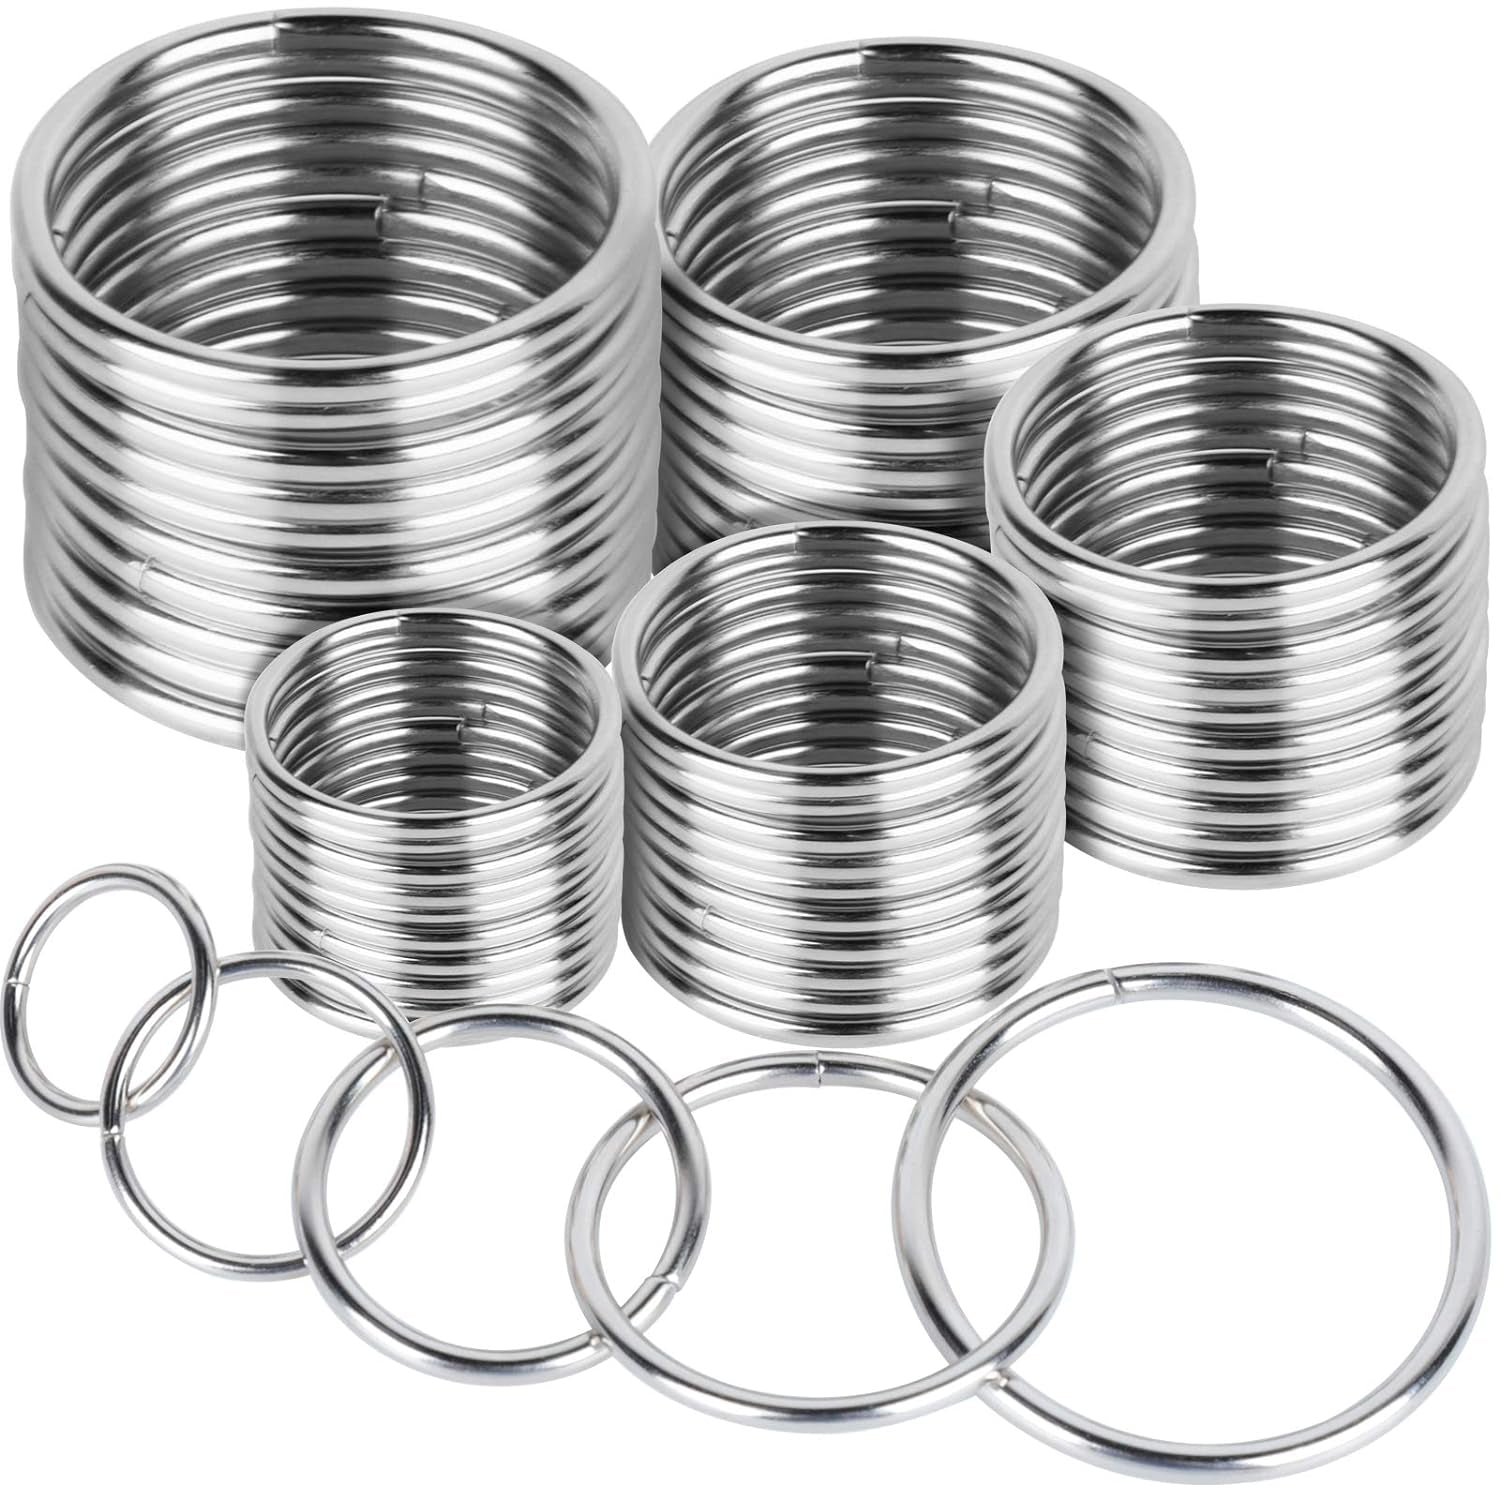 Metal O Ring，50 Pcs Silver Multi Purpose Metal O Ring for Macrame, Camping, Dog Leashes, Hardware, Bags and More Craft Project - 16Mm, 21Mm, 25Mm, 32Mm, 38Mm